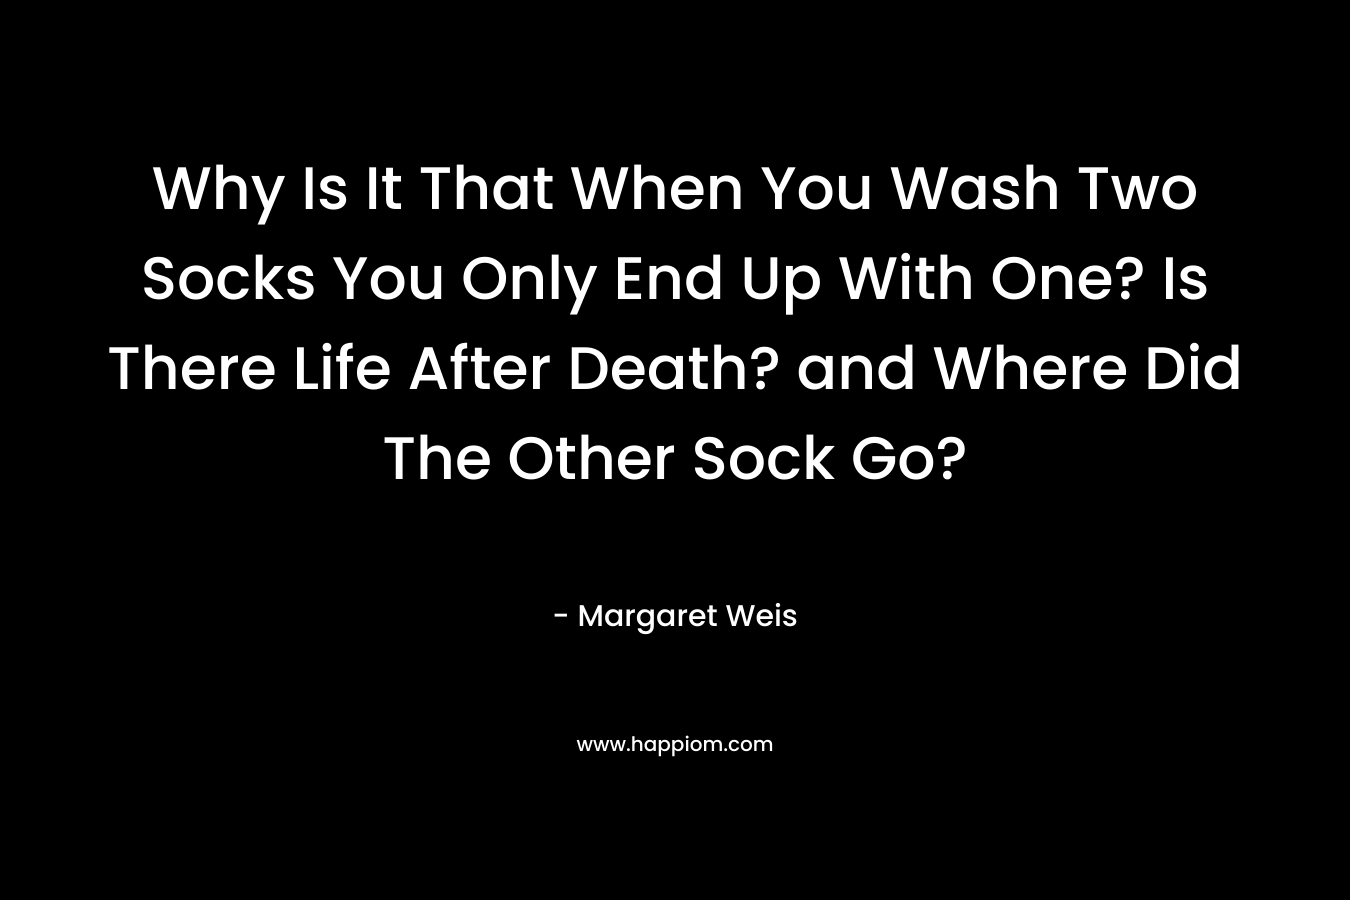 Why Is It That When You Wash Two Socks You Only End Up With One? Is There Life After Death? and Where Did The Other Sock Go?